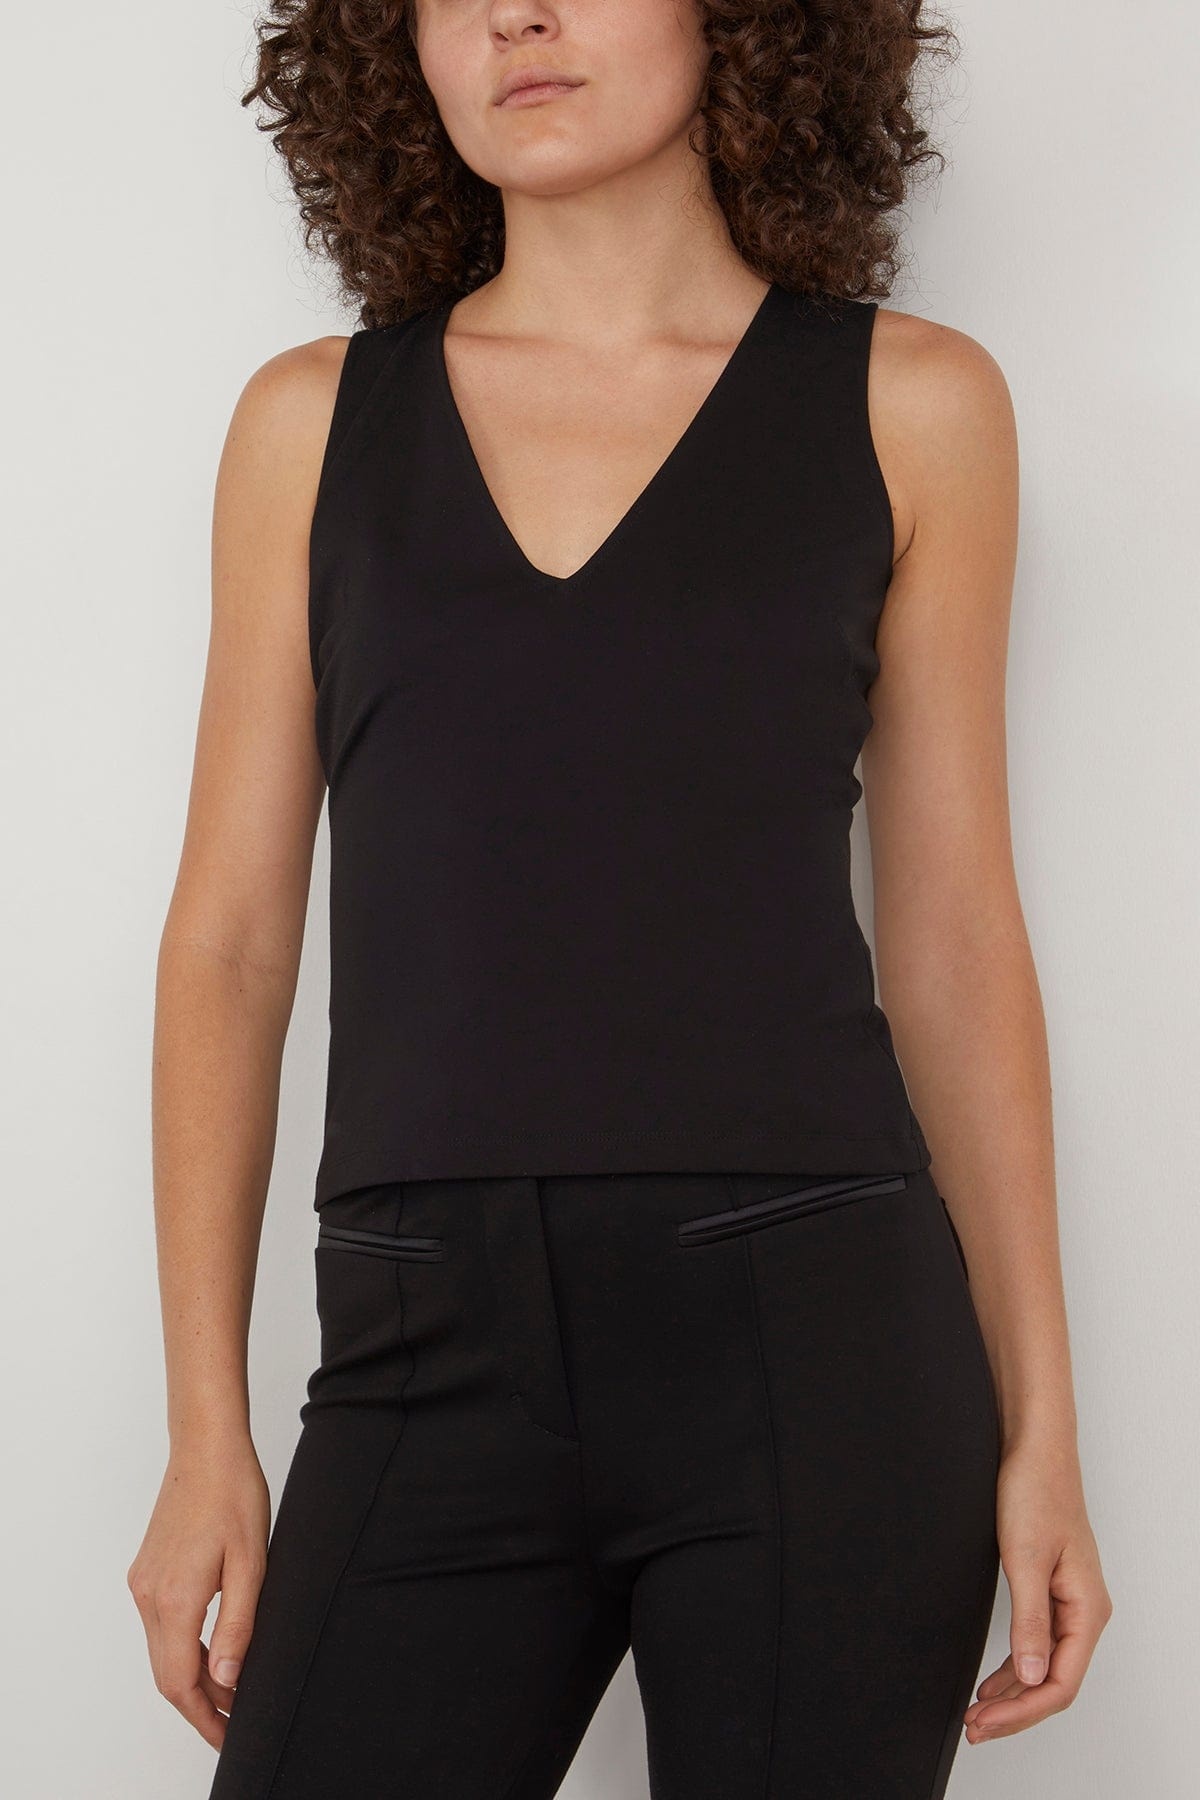 Emotional Essence Top in Pure Black - 3